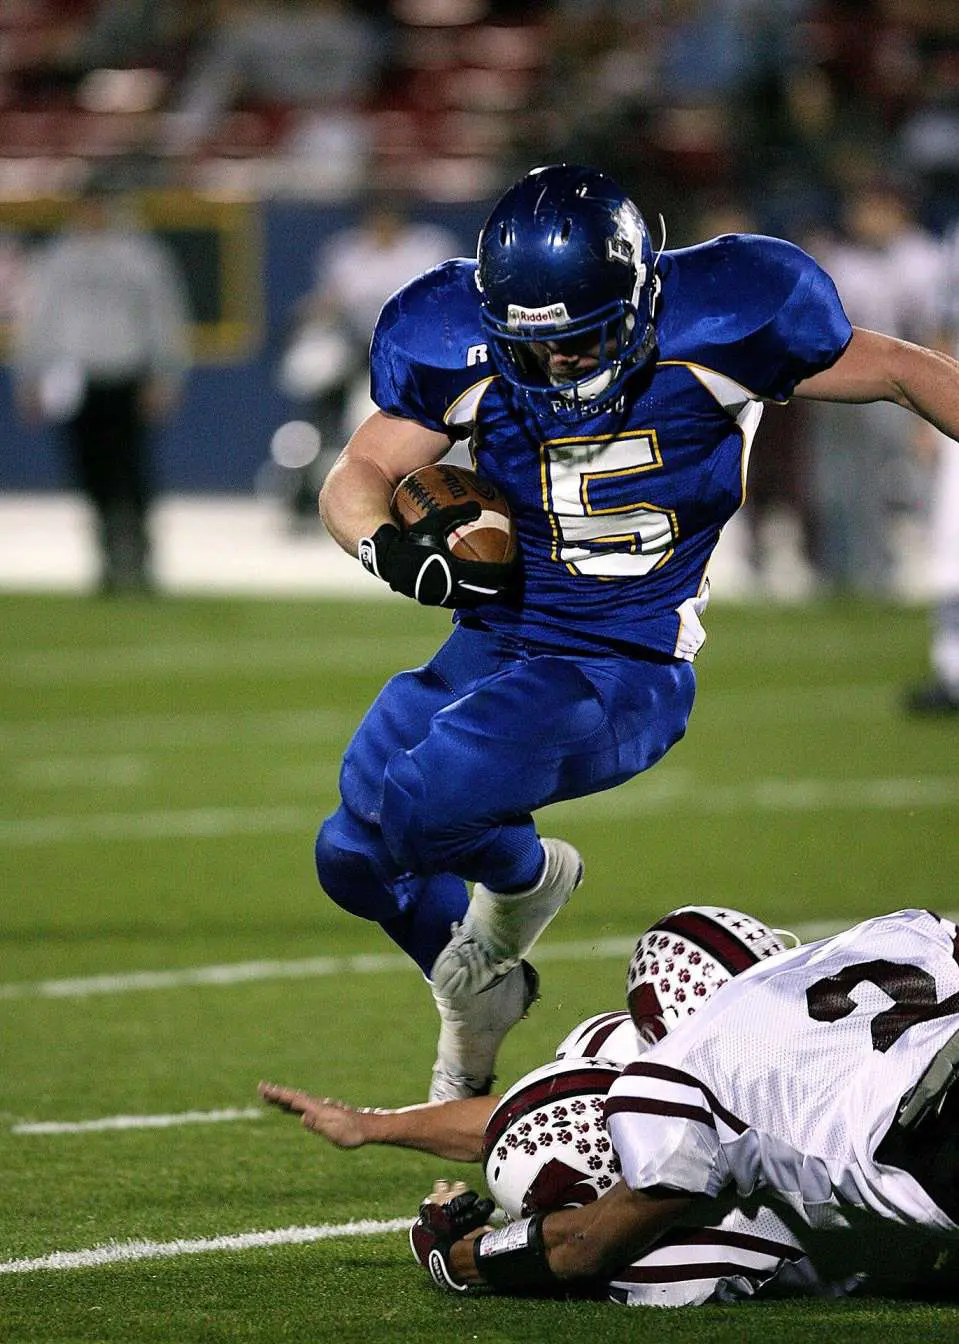 A football player wearing a blue uniform with the number 5 runs with the ball, avoiding a tackle from two defenders in white uniforms on Coachella Valley Turf. The action unfolds on this premier sports field astroturf installer’s site, with a crowd blurred in the background.